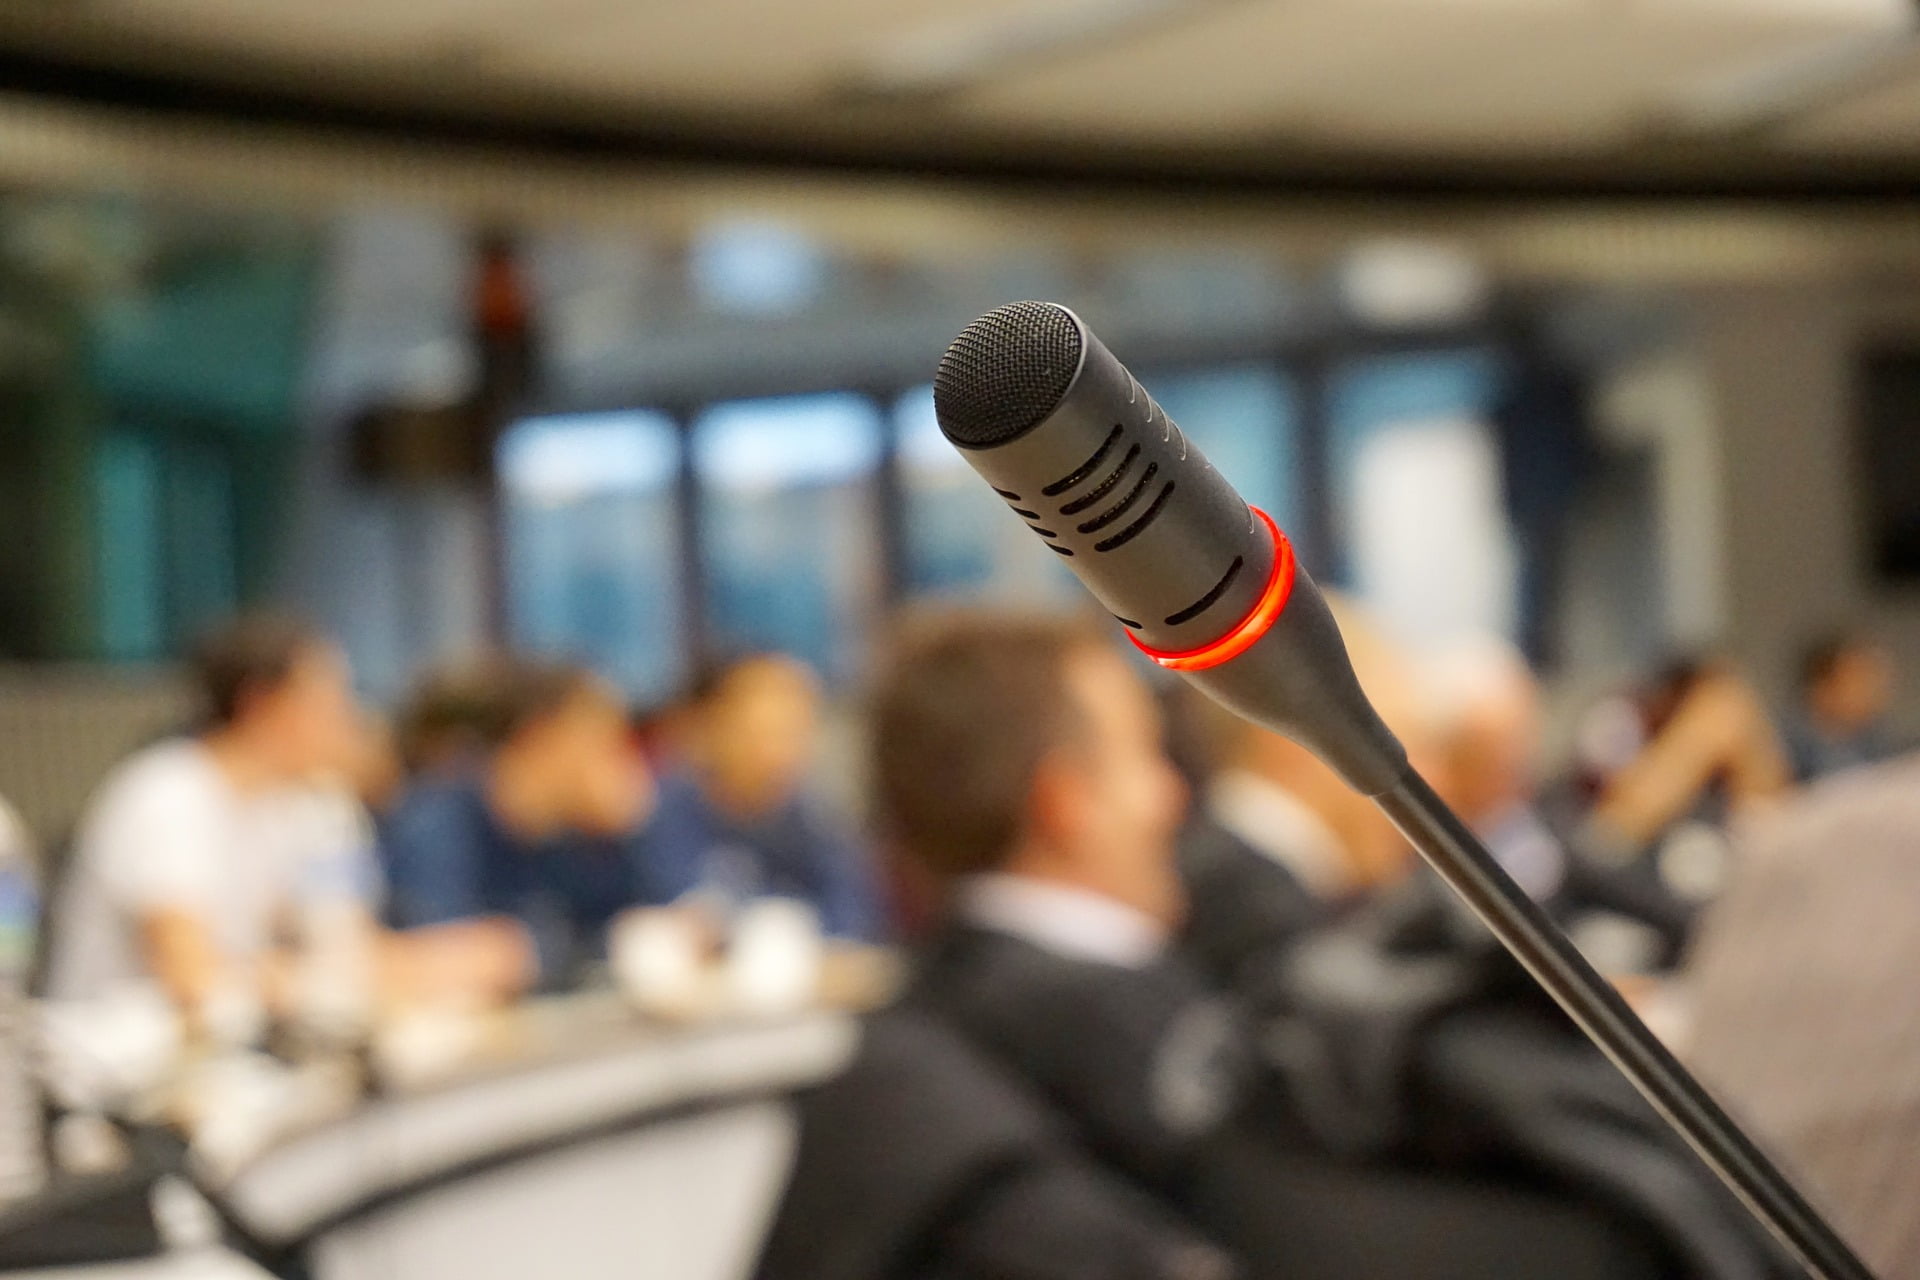 Microphone, business conference event